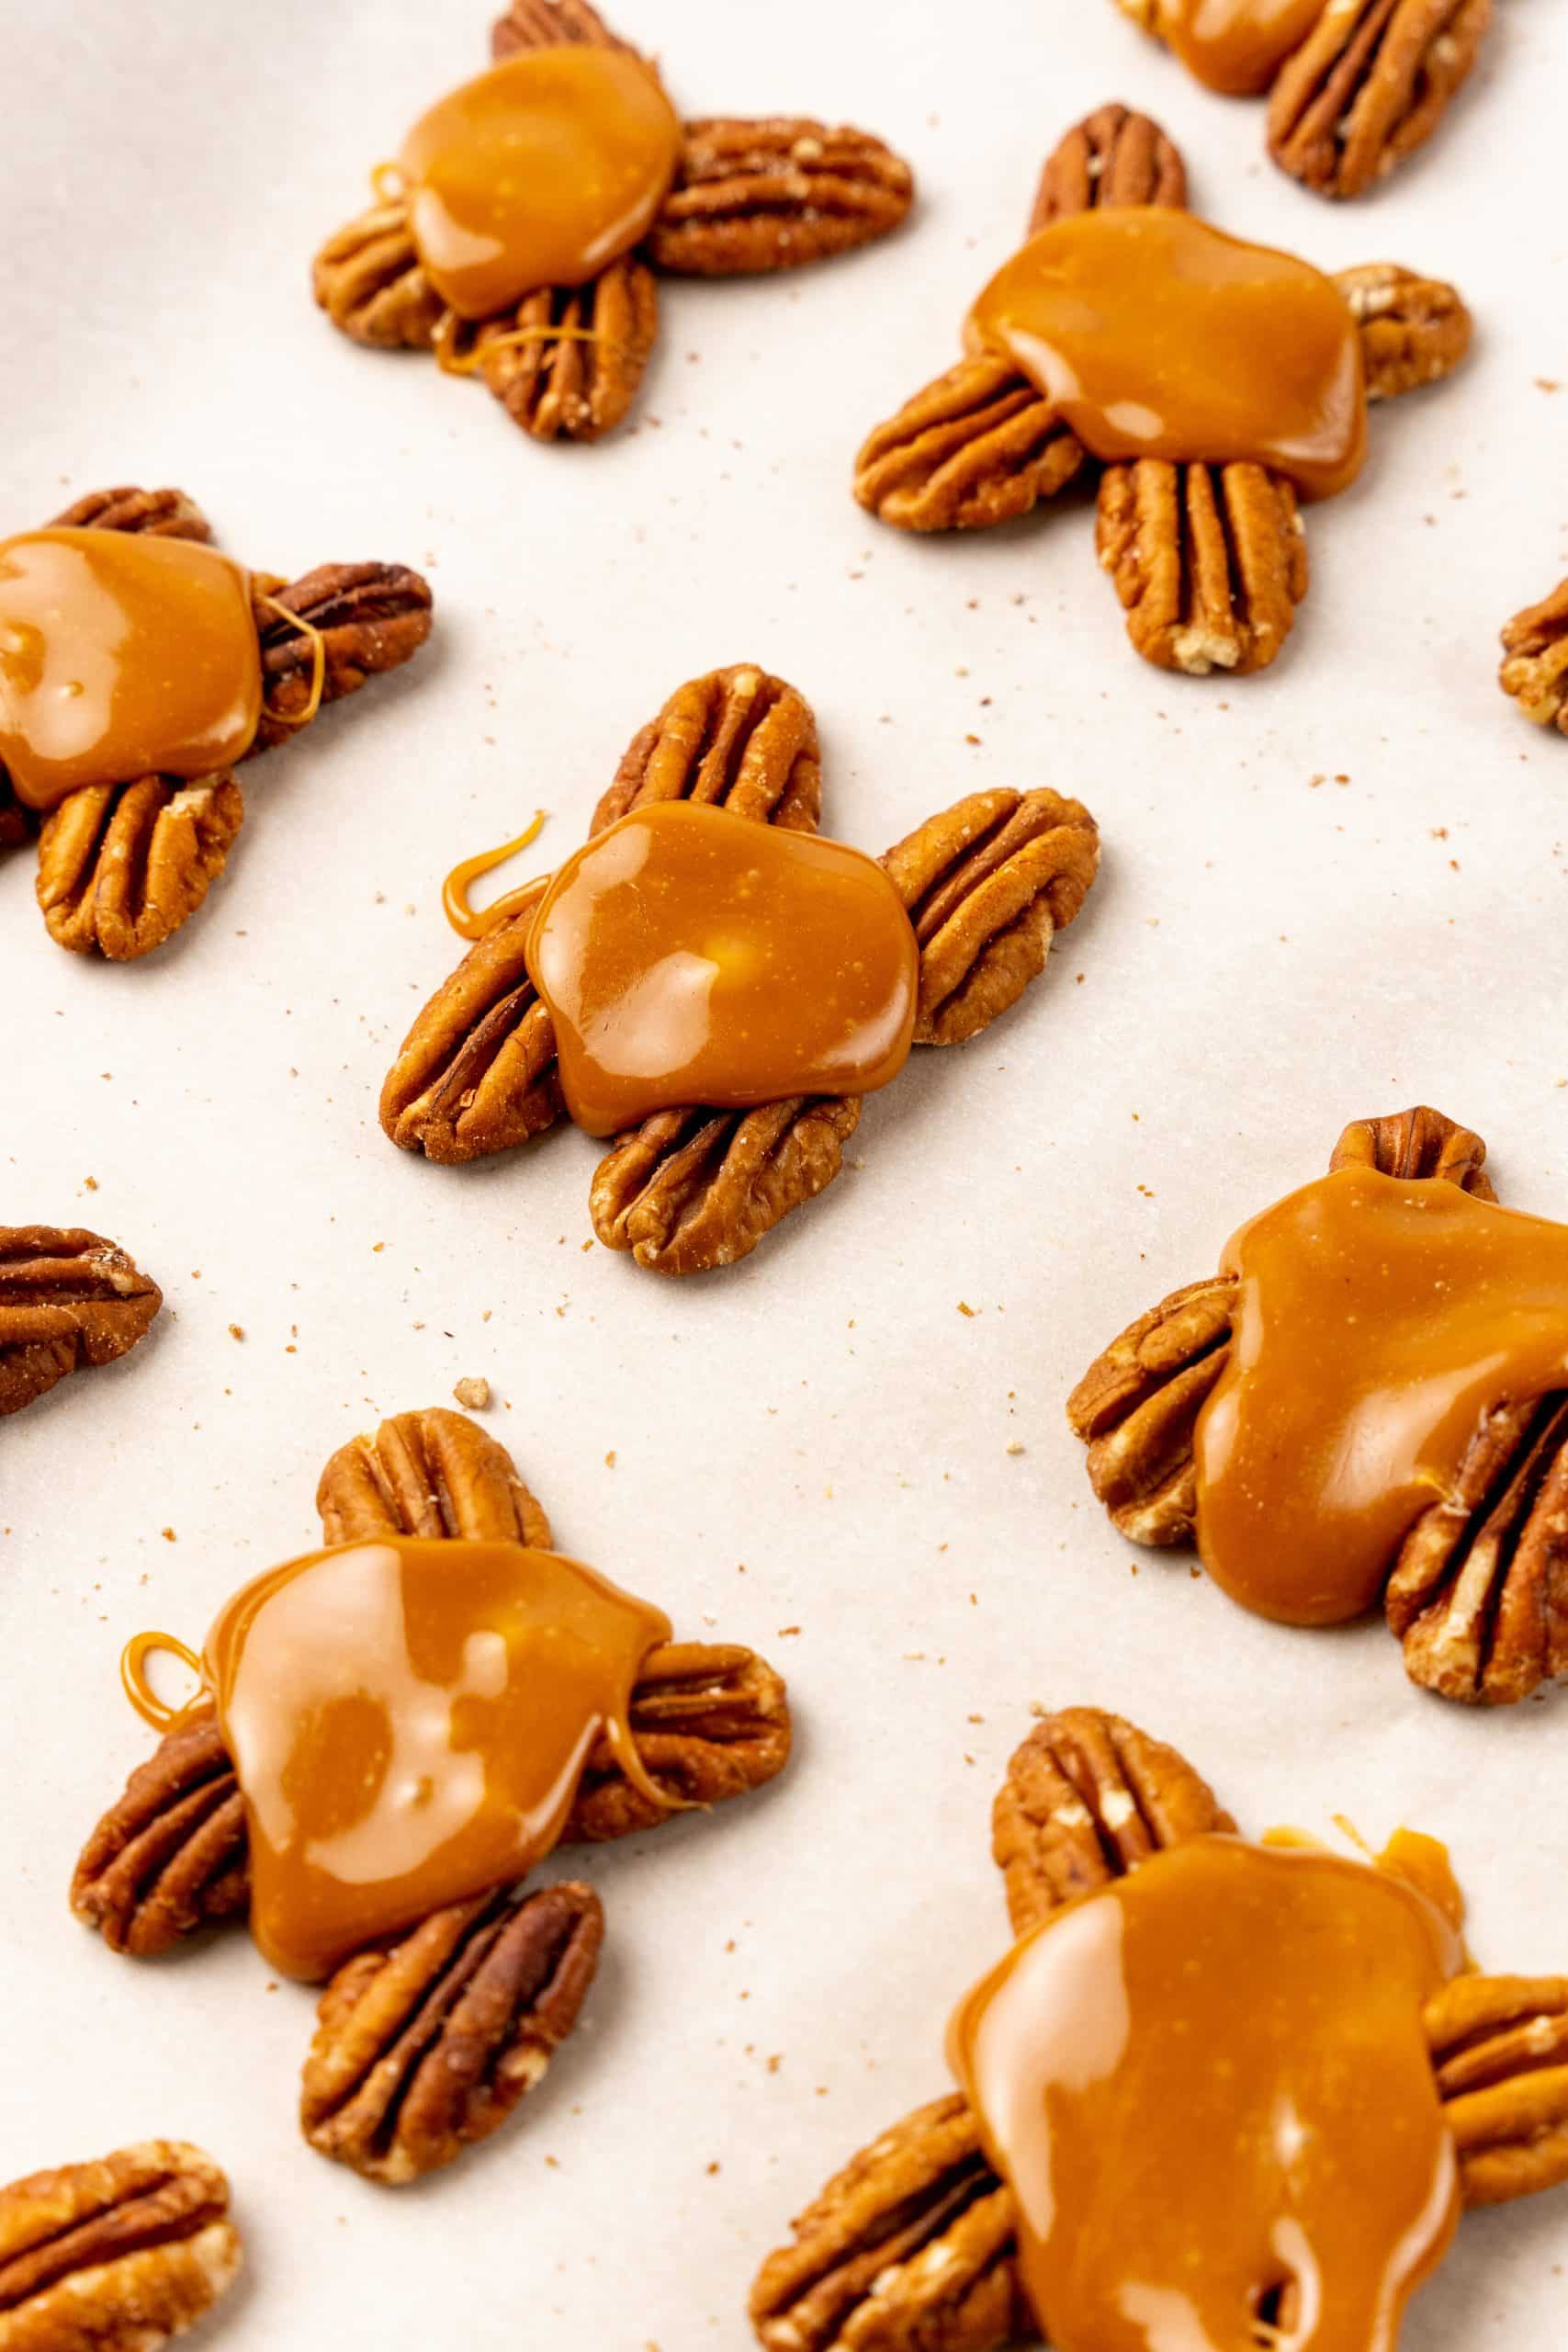 caramel poured over pecan halves arranged on a parchment paper lined baking sheet